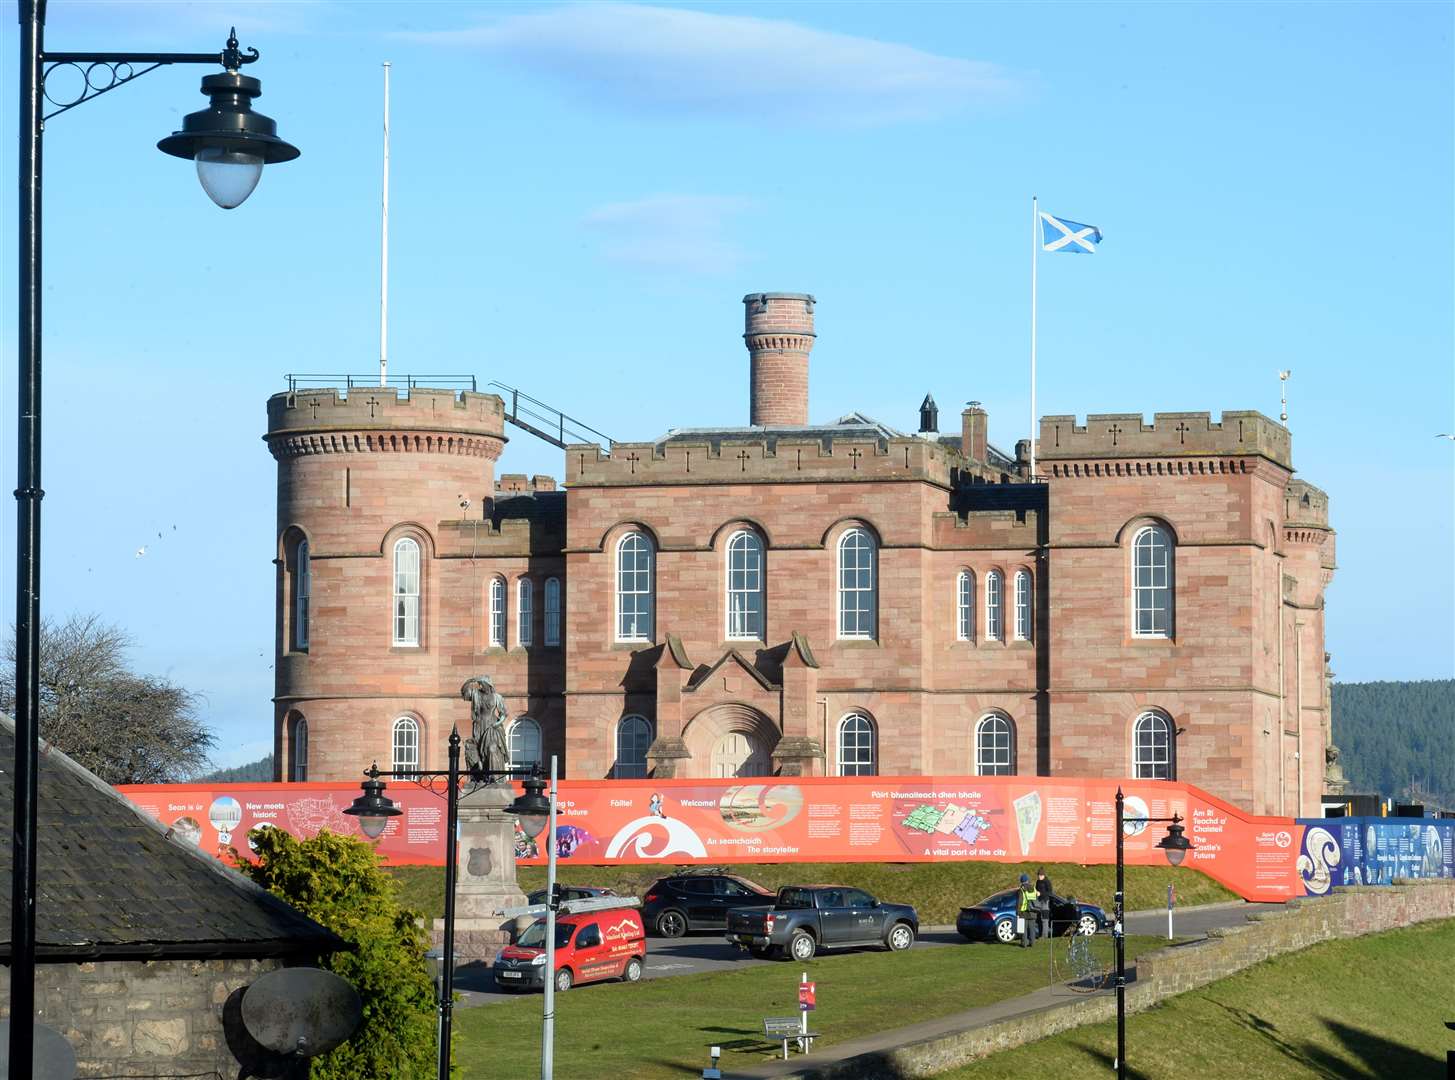 The redevelopment of Inverness Castle is a seminal project that will bring more visitors to the city.